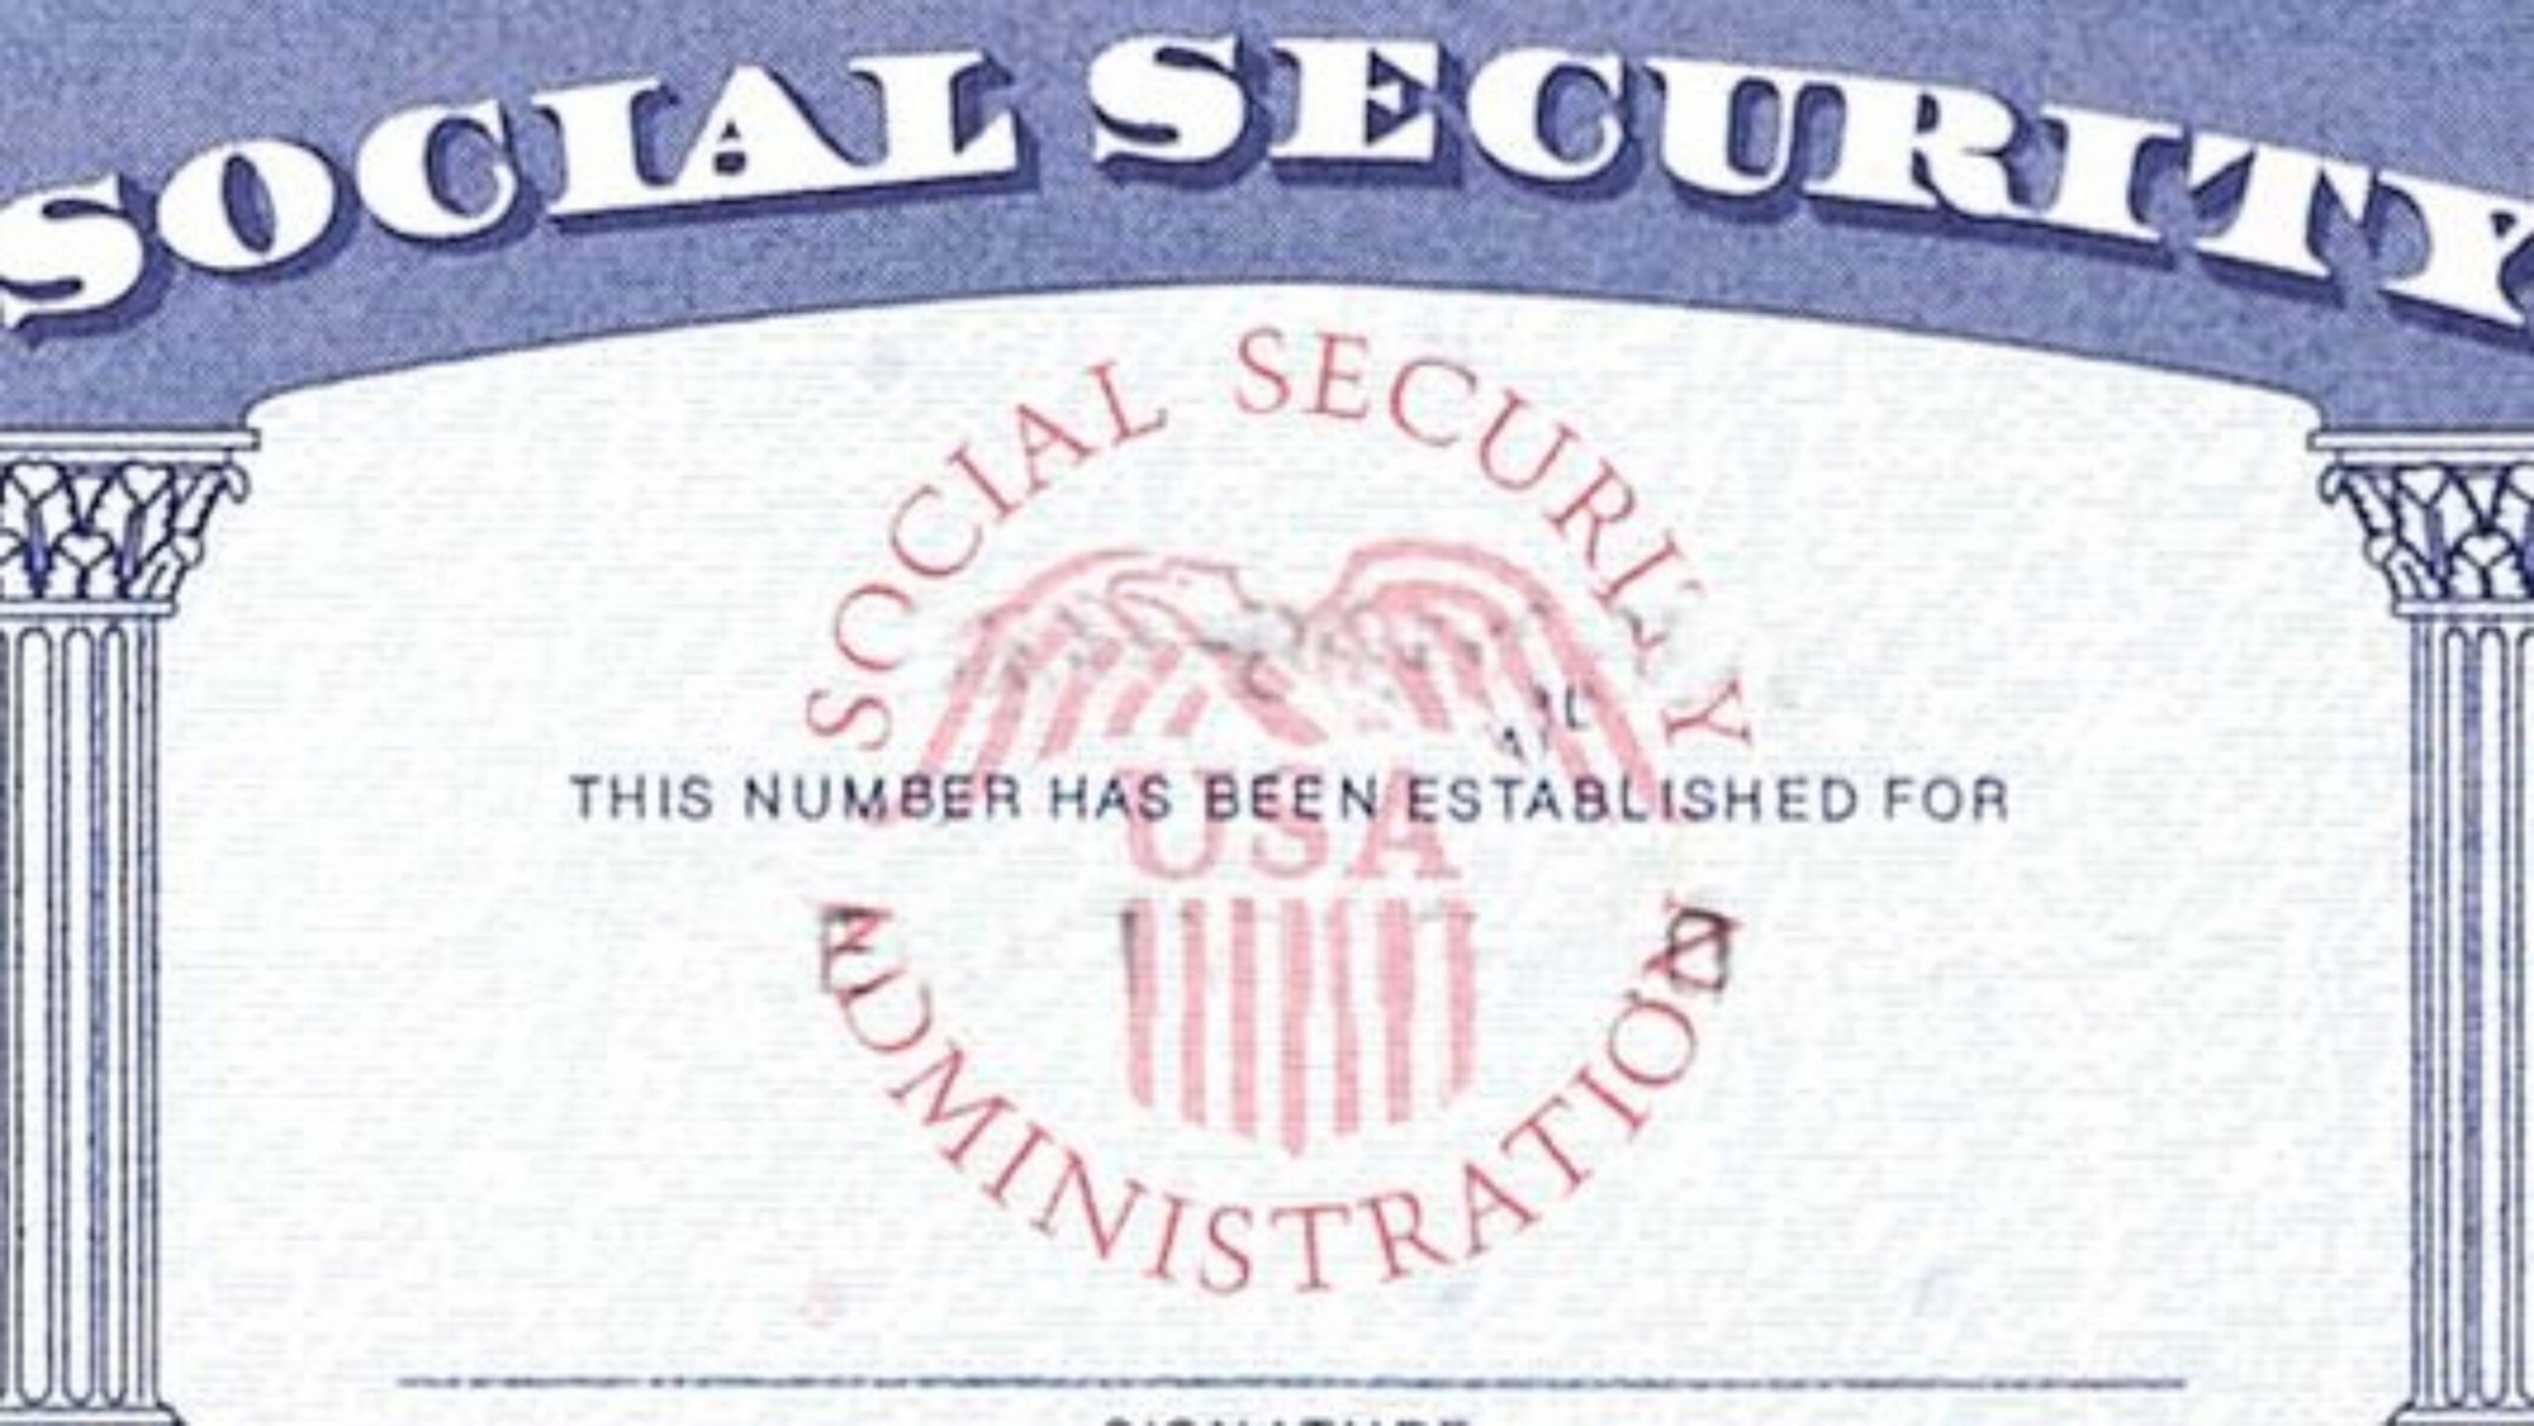 Blank Social Security Card Template Download - Great inside Blank Social Security Card Template Download